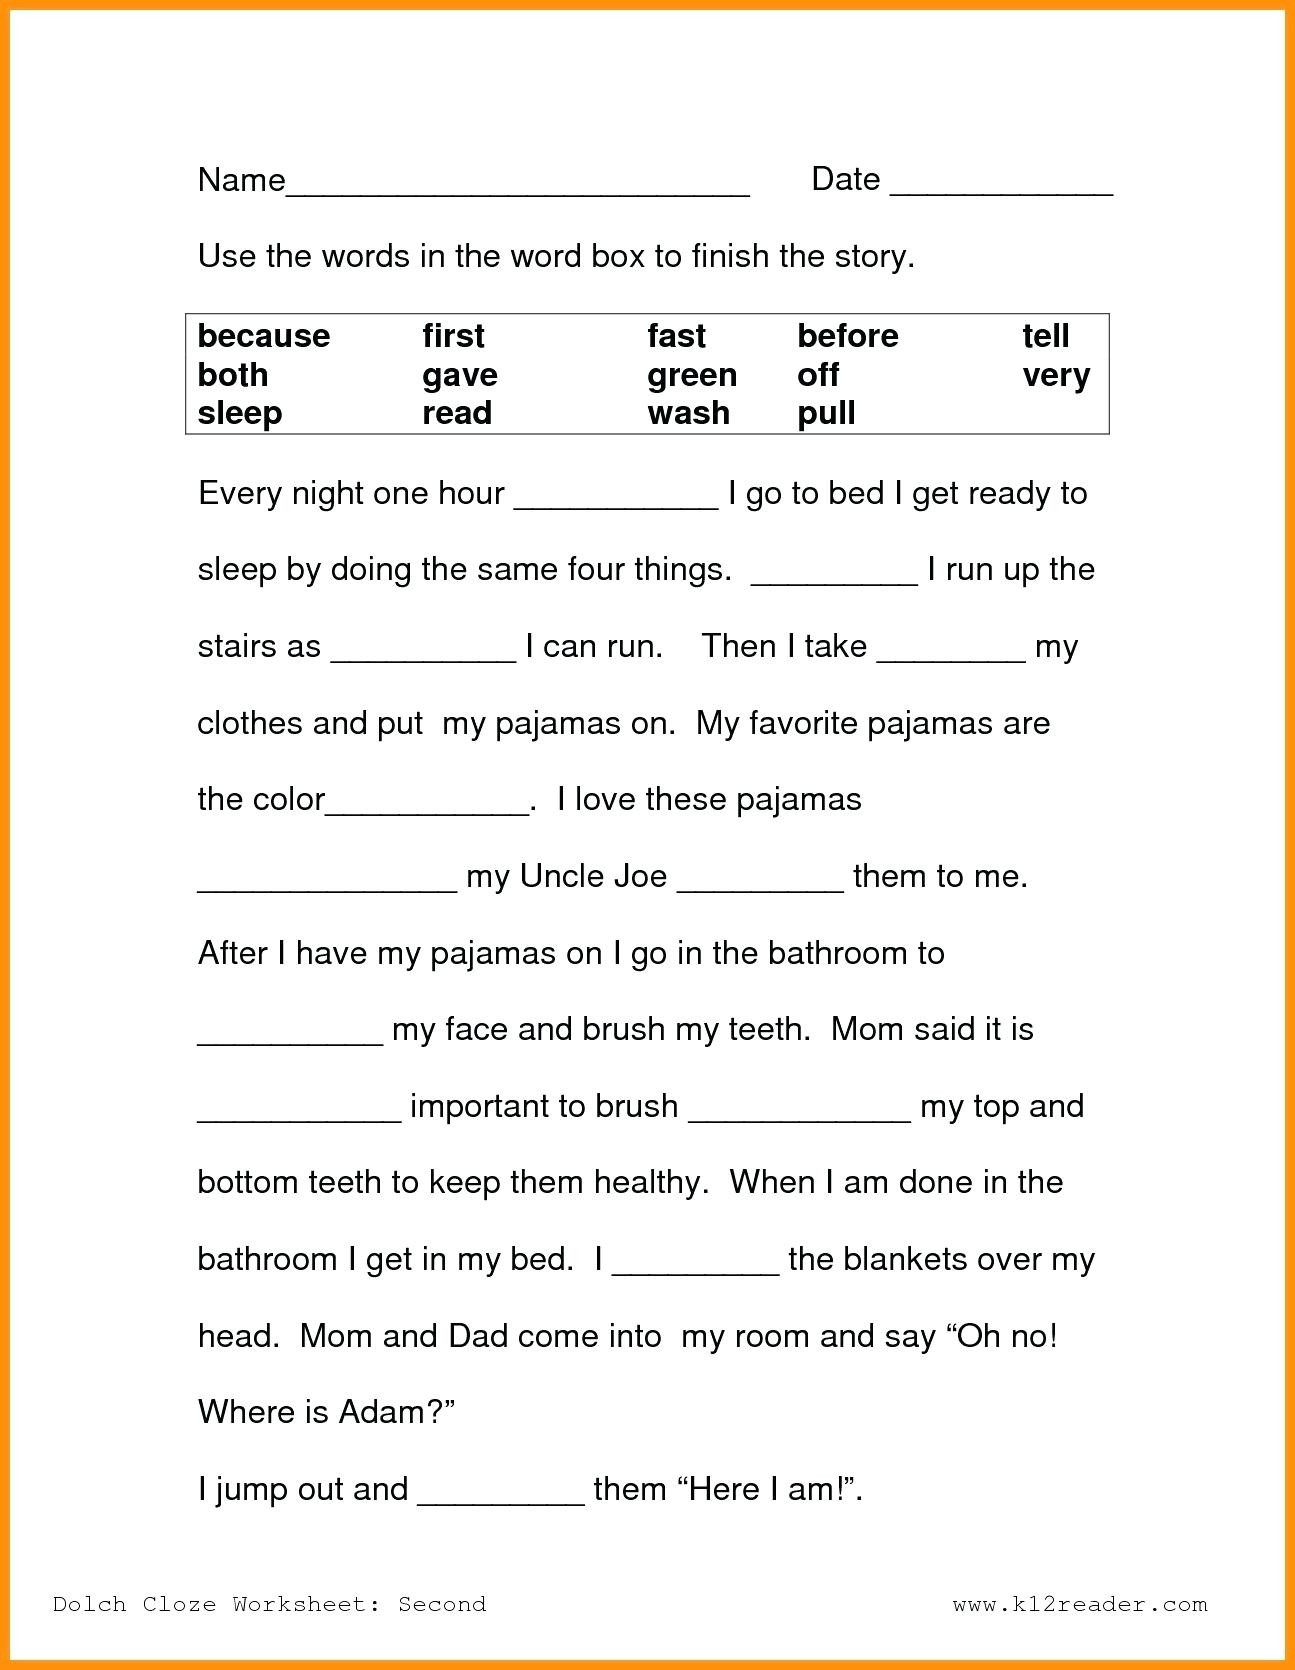 worksheet ideas extraordinary free reading worksheets for 3rd grade ideasree preschool teachersorirst kids books economics prehension habitats evaluating expressions with exponents farm